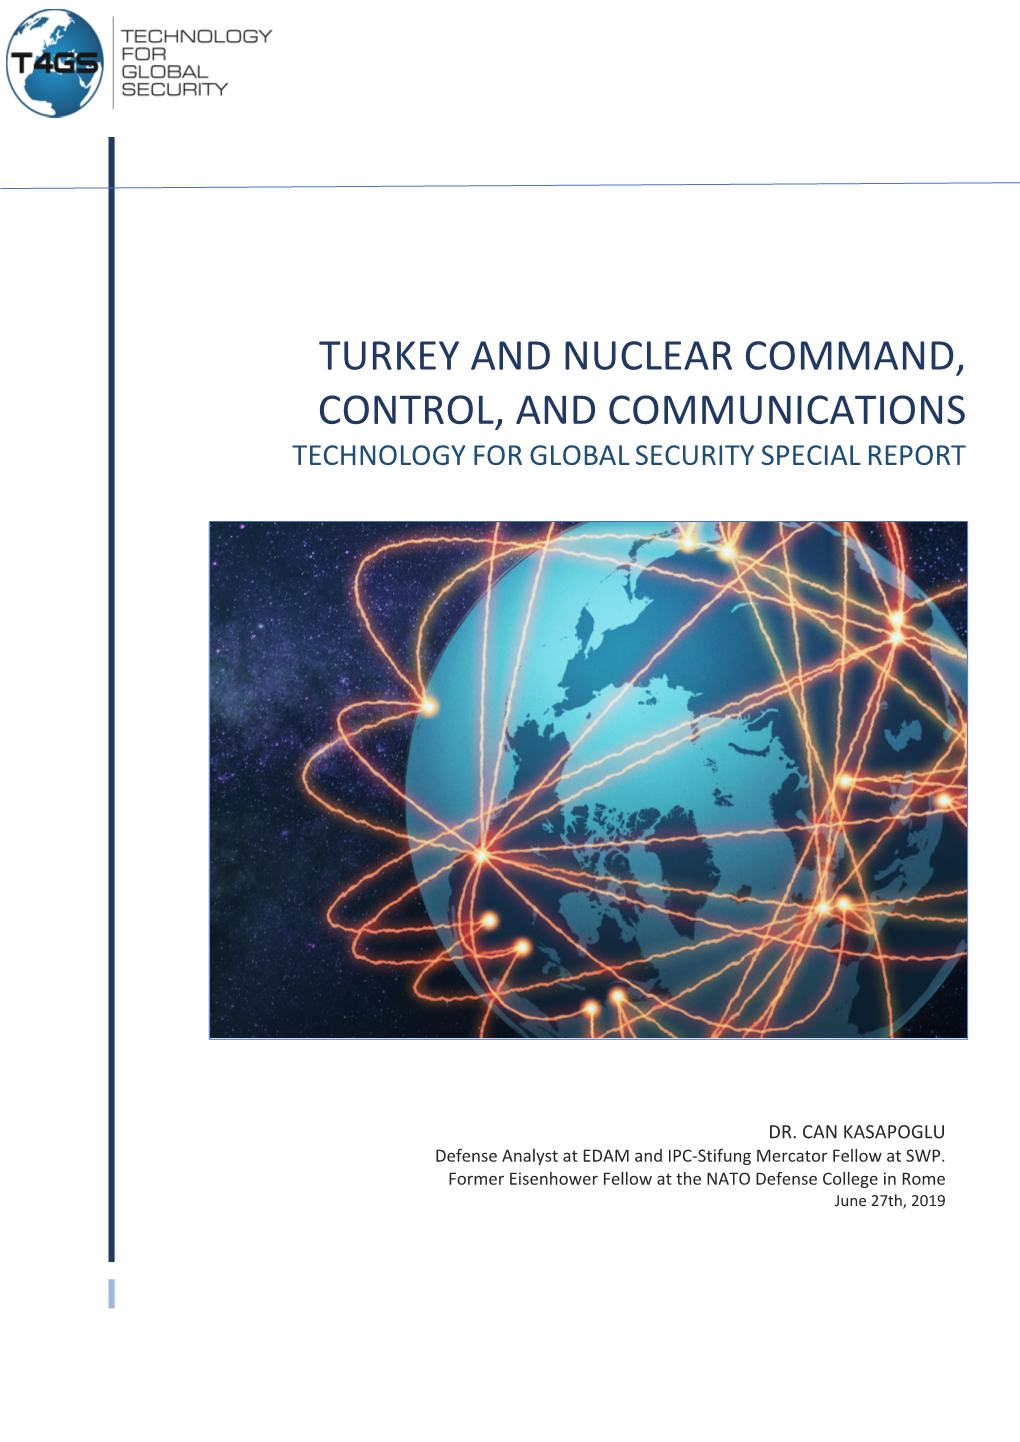 Turkey and Nuclear Command, Control, And